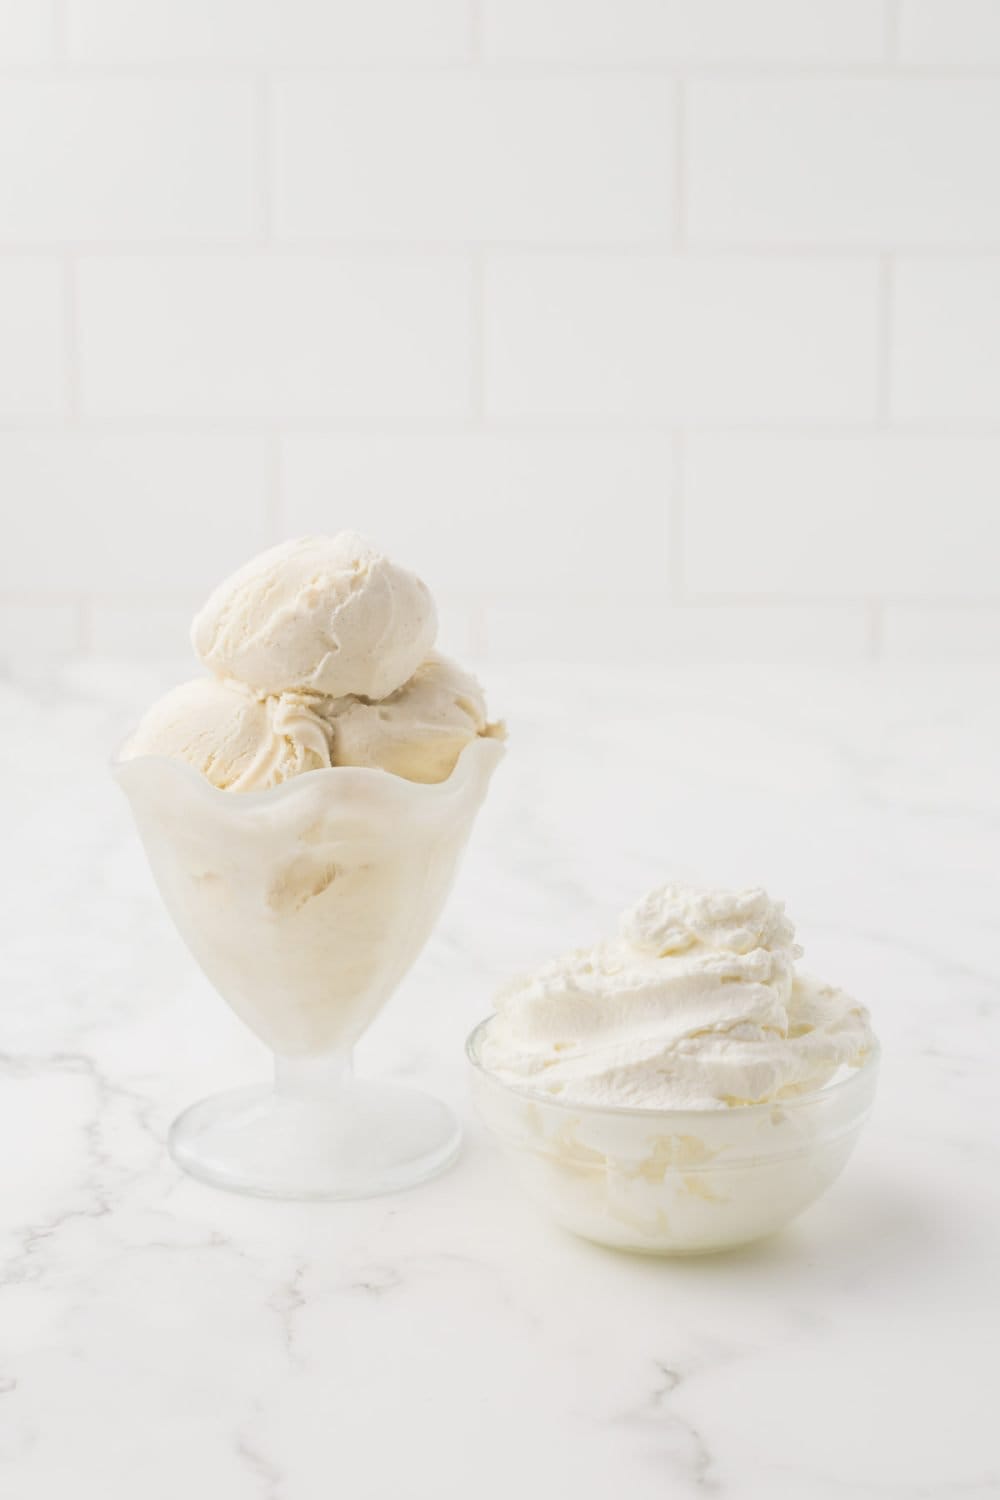 clear glass containers of piled whipped cream